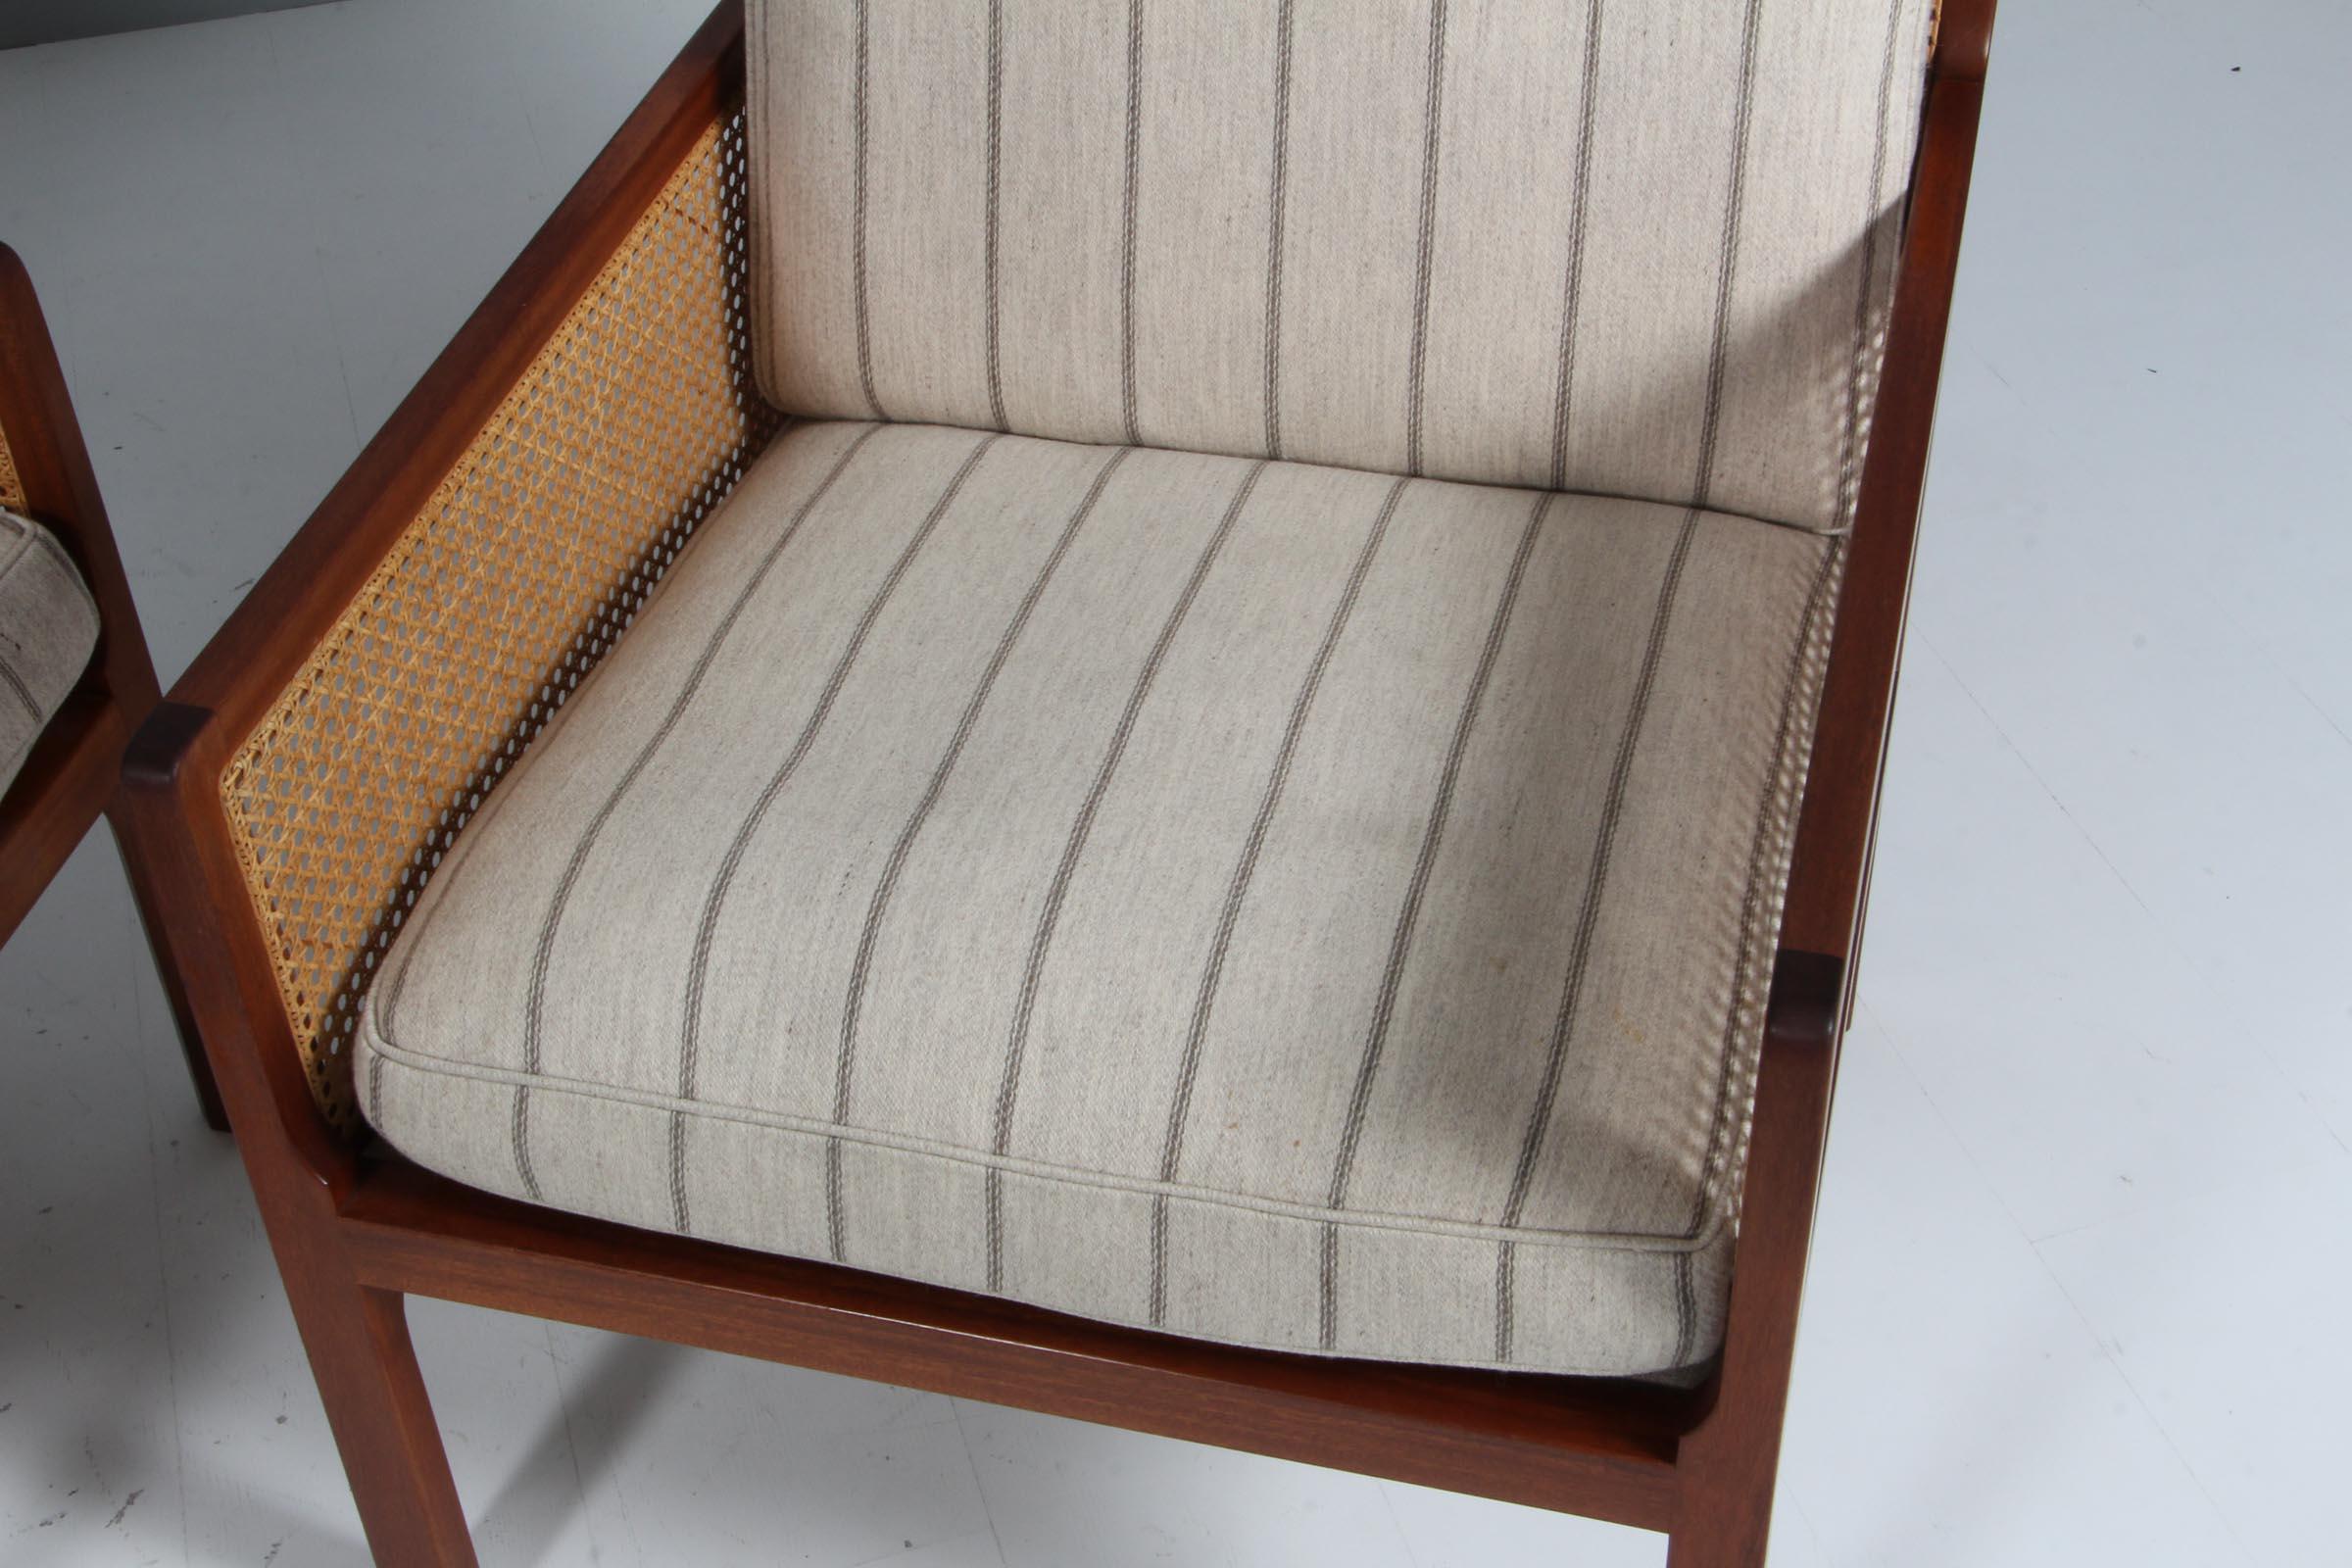 Bernt Pedersen lounge chair, mahogany and Cane In Good Condition For Sale In Esbjerg, DK